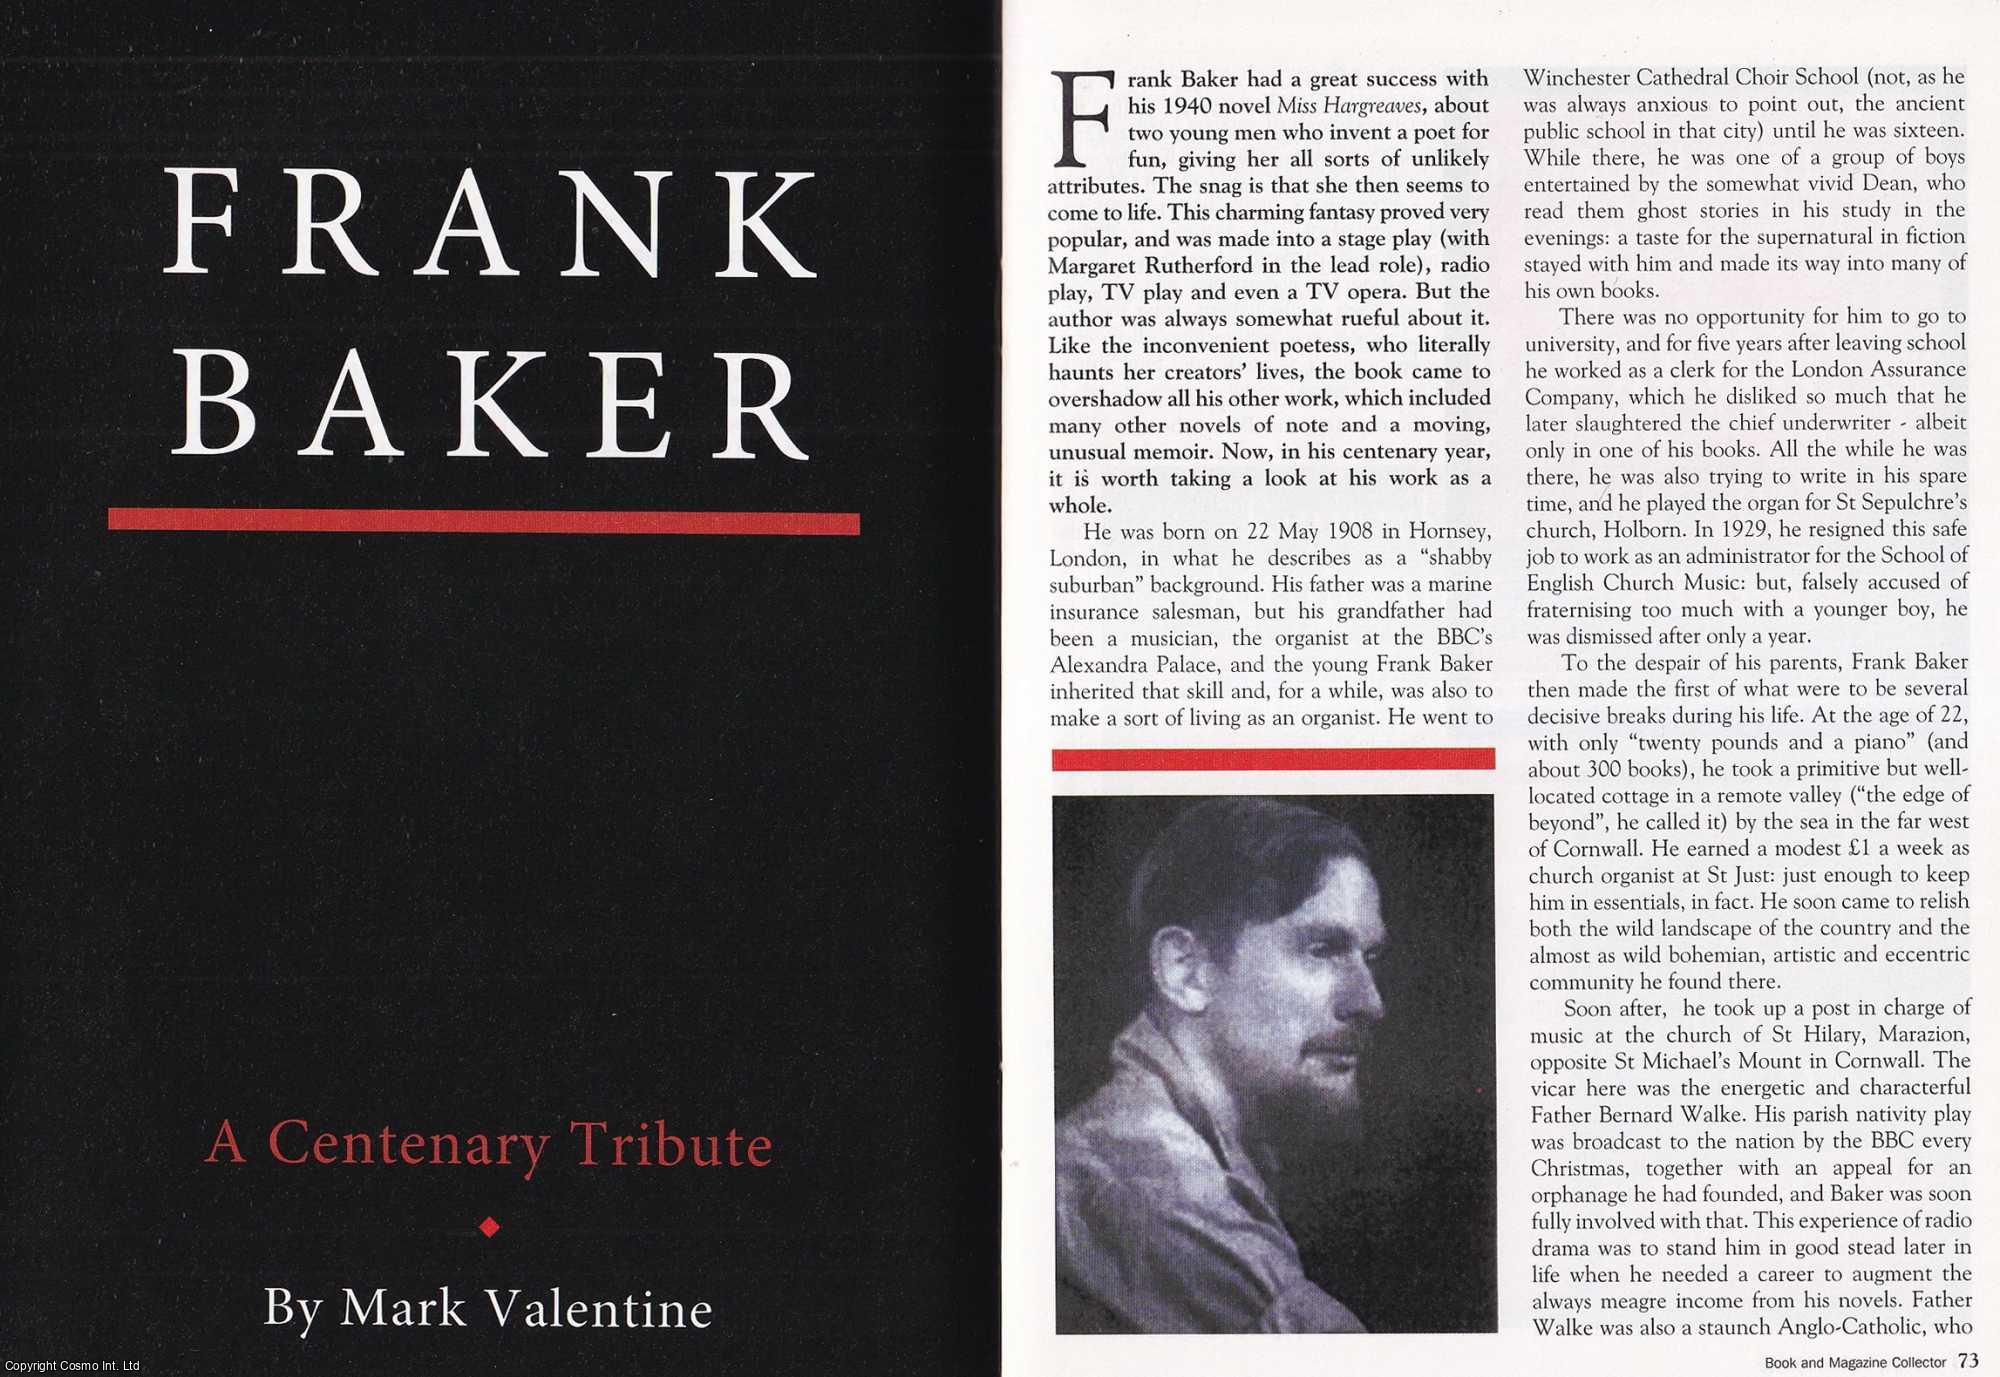 Mark Valentine - Frank Baker (author) : A Centenary Tribute. This is an original article separated from an issue of The Book & Magazine Collector publication.